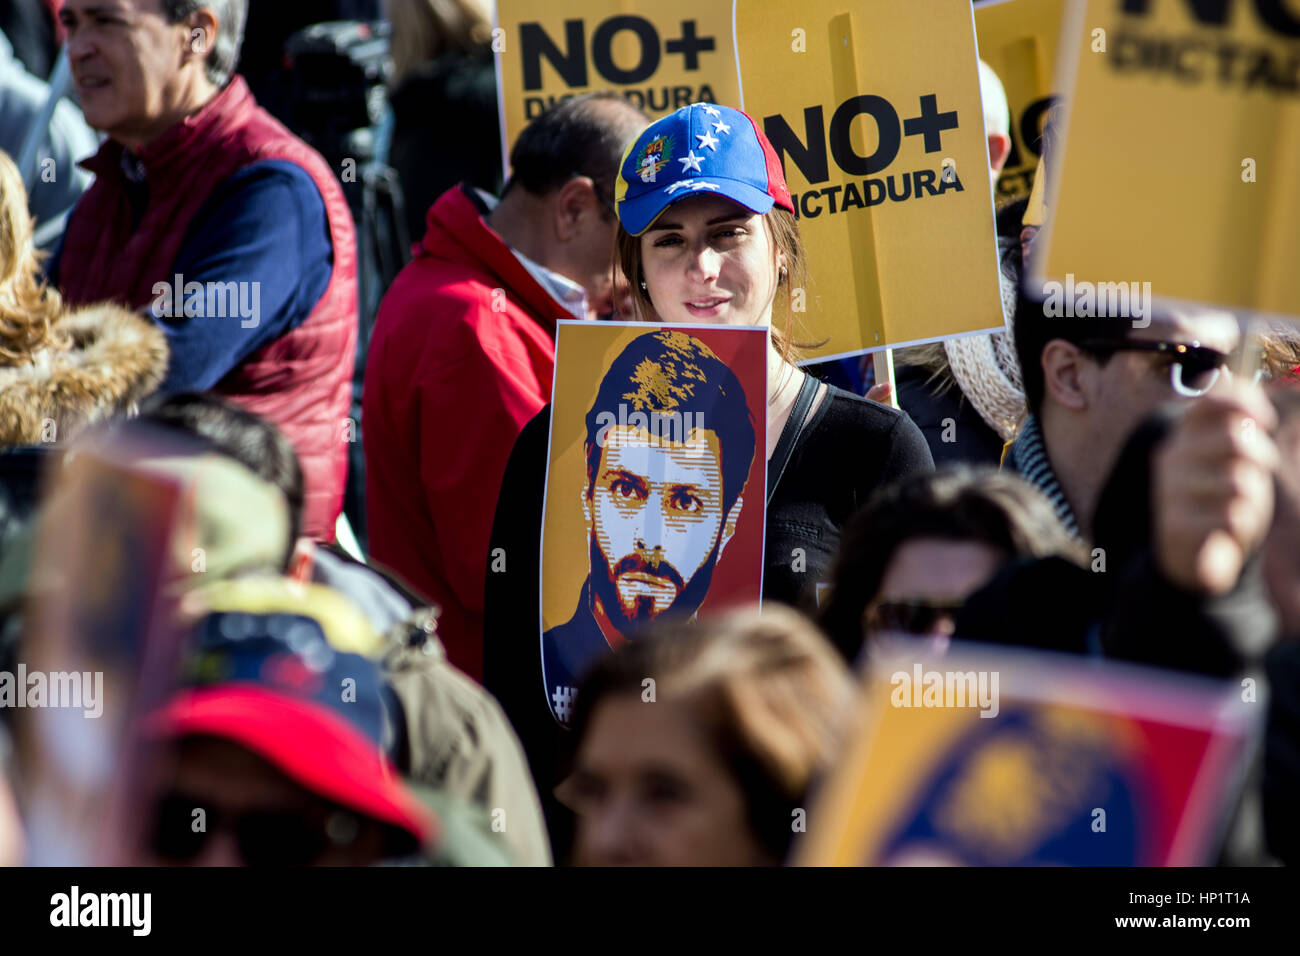 Madrid, Spain. 18th Feb, 2017. A woman holds a picture of Leopoldo Lopez during a protest demanding the release of political prisoners Credit: Marcos del Mazo/Alamy Live News Stock Photo